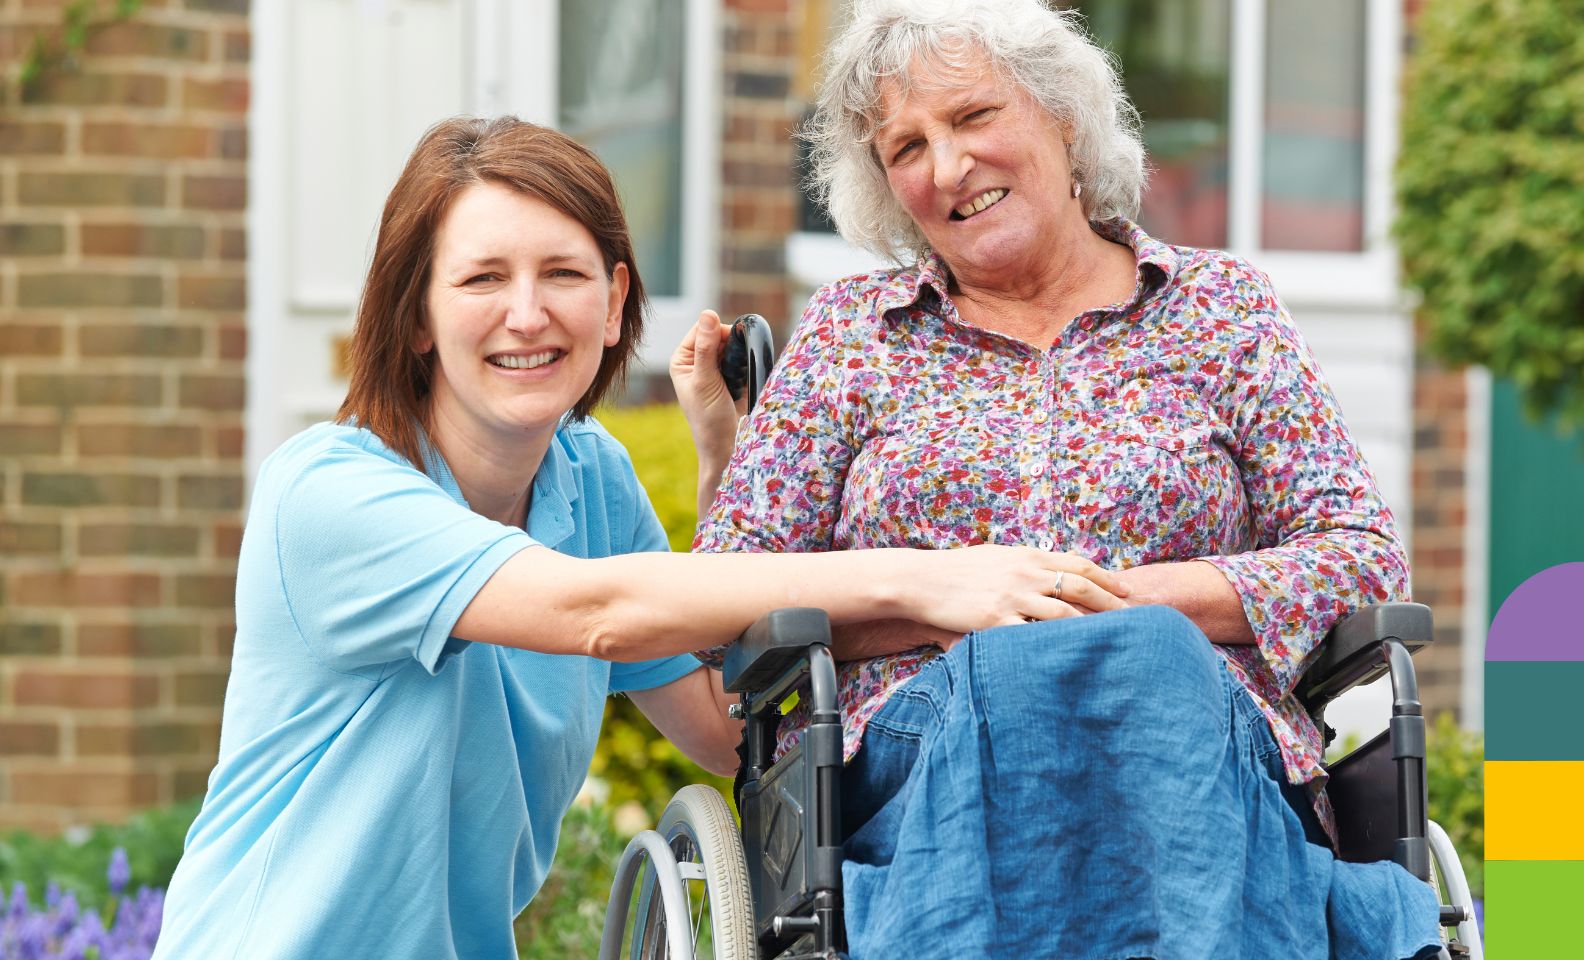 Getting Support as a Carer